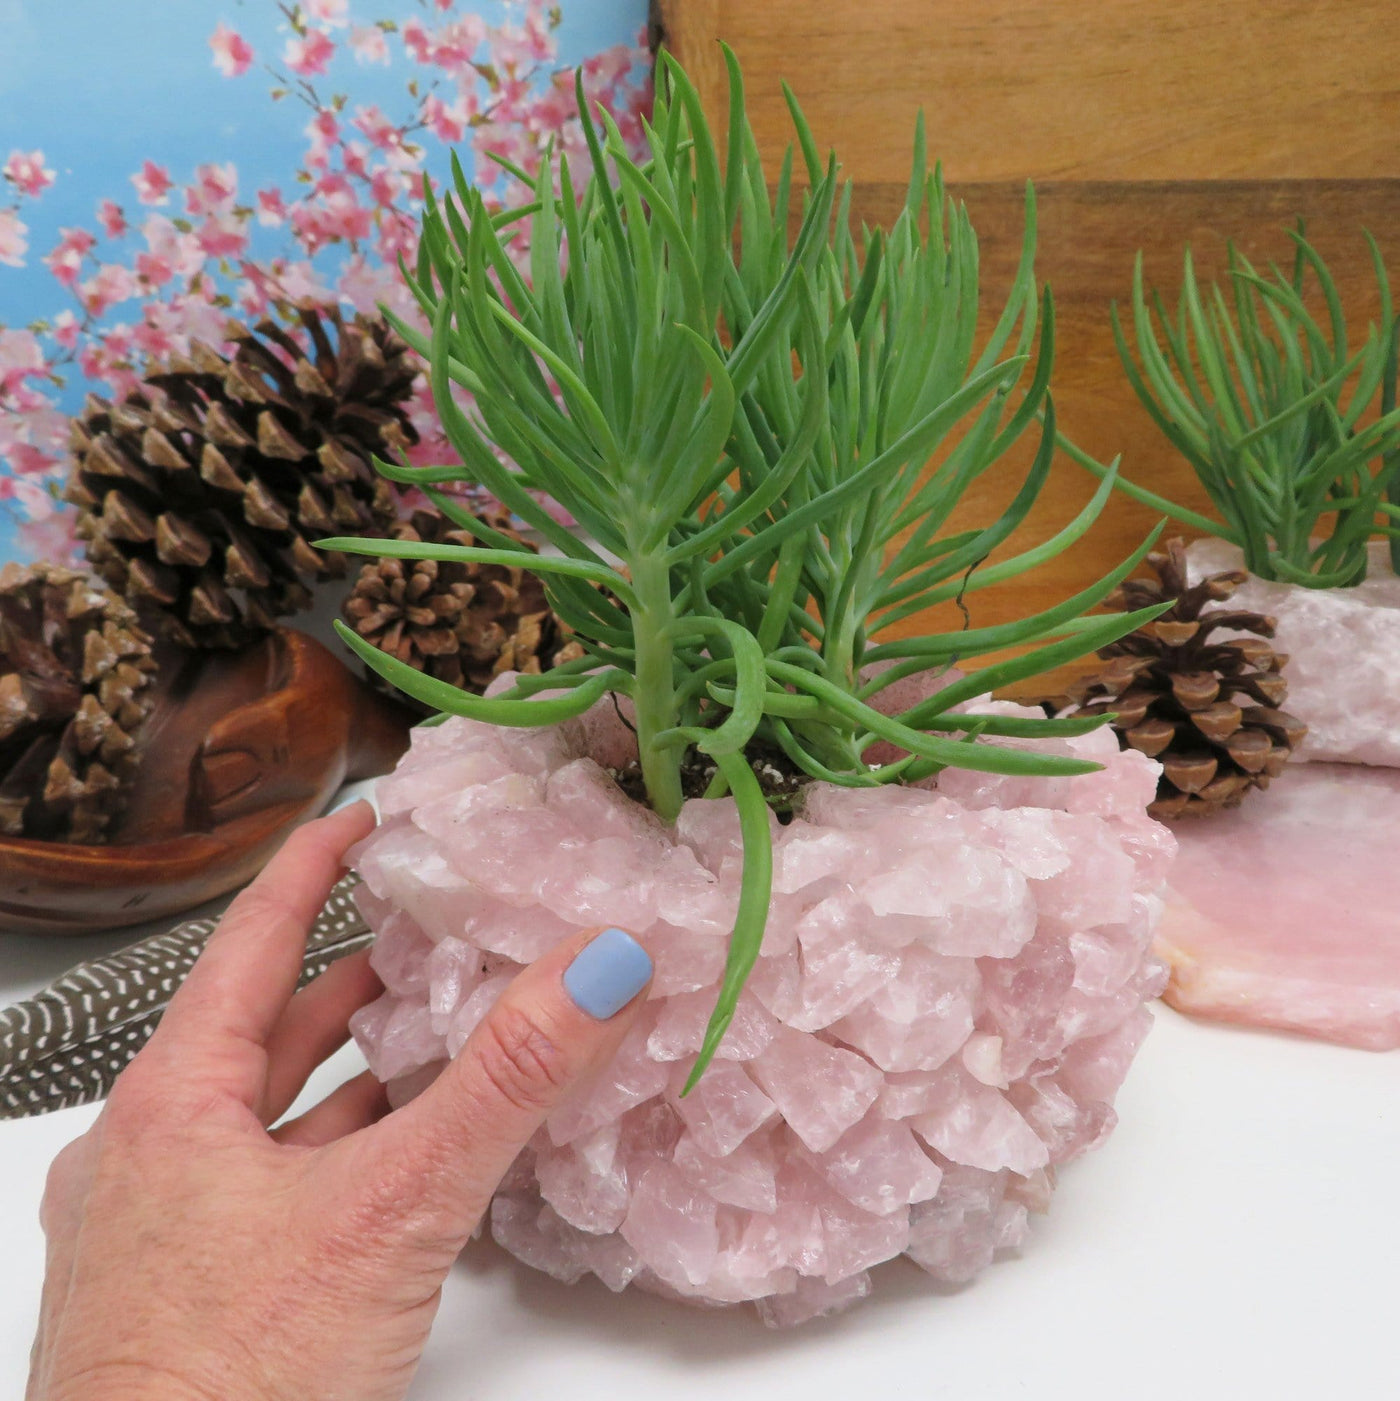 Hand holding Rose Quartz Planter Pot with succulent in it with various decorations in the background